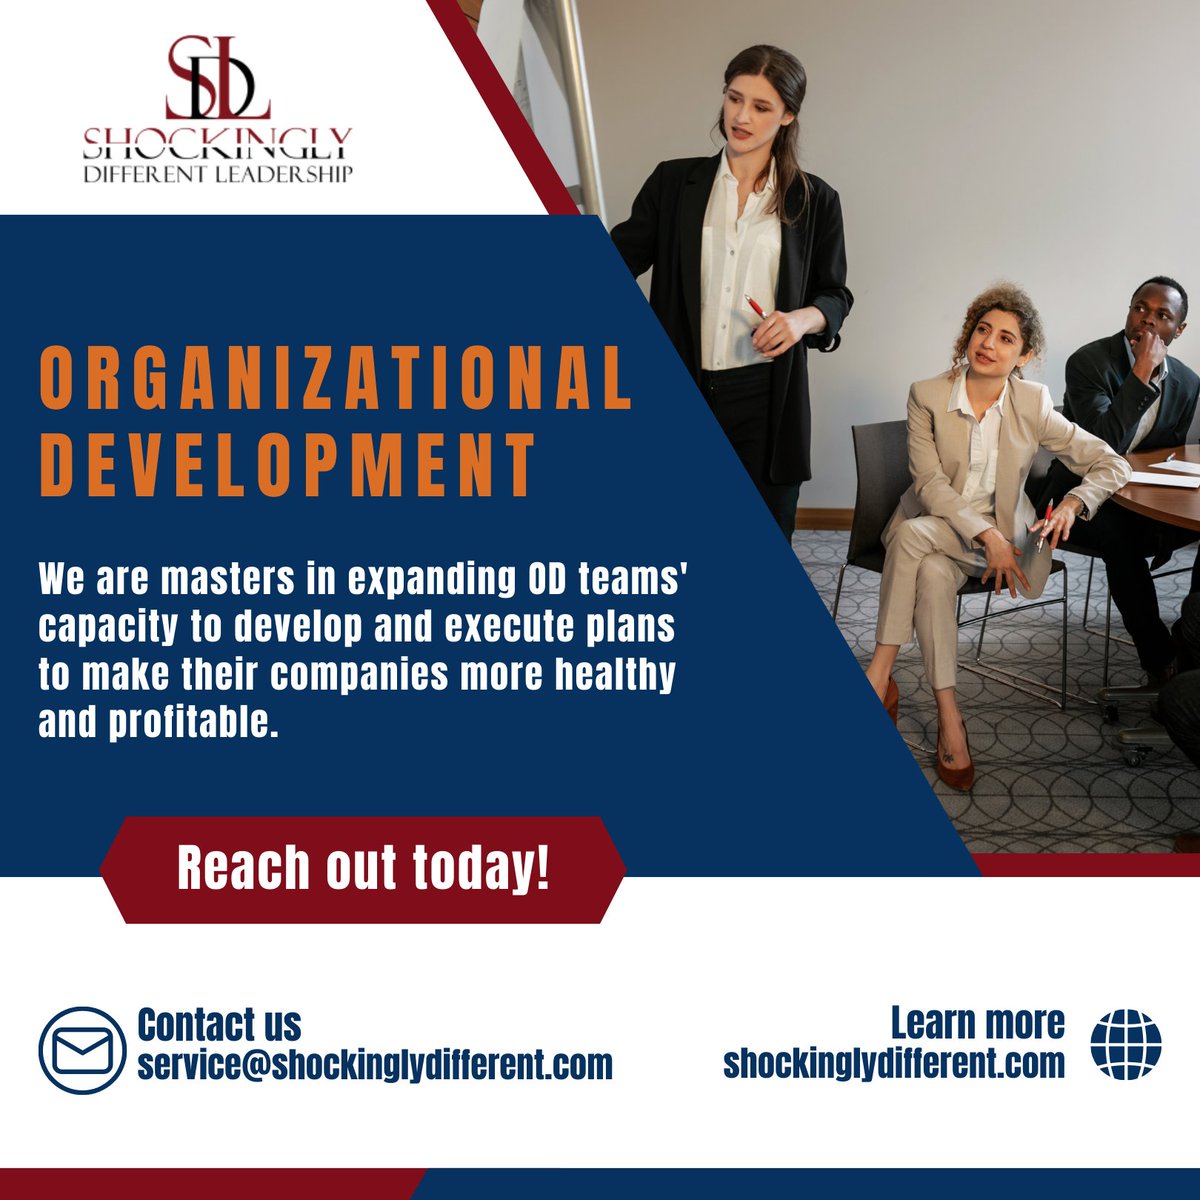 🌟 We specialize in empowering your team to create healthier and more profitable organizational landscapes.

Ready to amplify your OD impact?

𝐑𝐞𝐚𝐜𝐡 𝐨𝐮𝐭:
service@shockinglydifferent.com

#OrganizationalDevelopment #CapacityExpansion #ODMastery #SDLLeadershipJourney